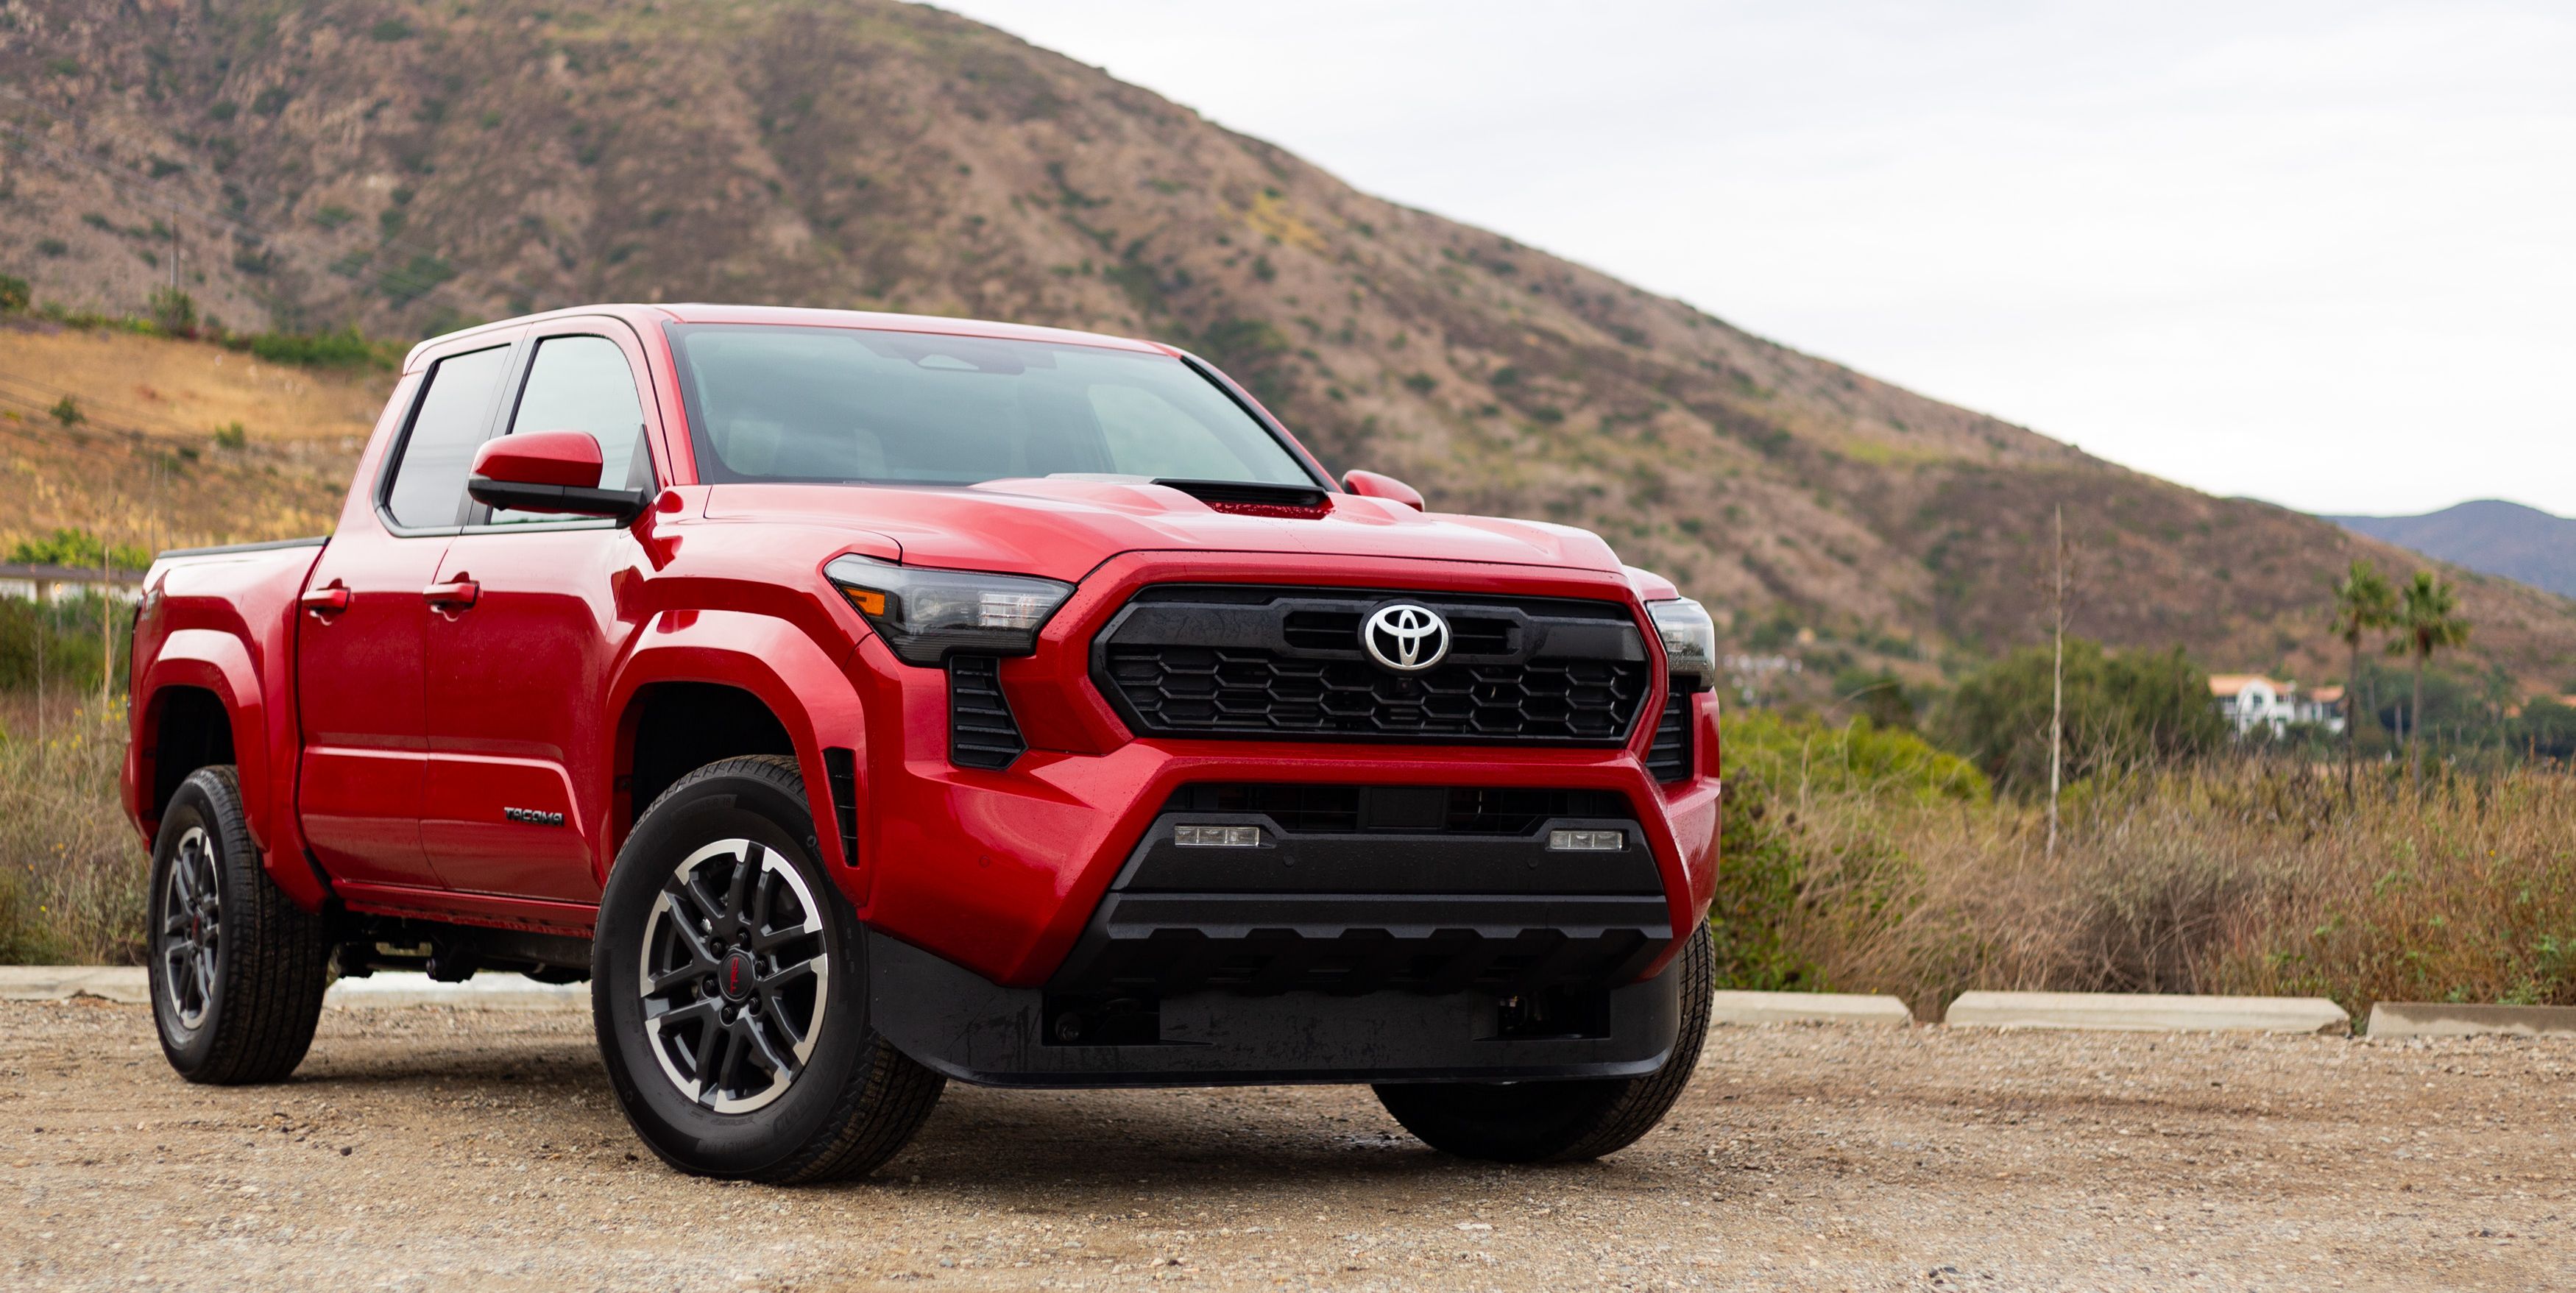 Here's How Much the New Toyota Tacoma Costs